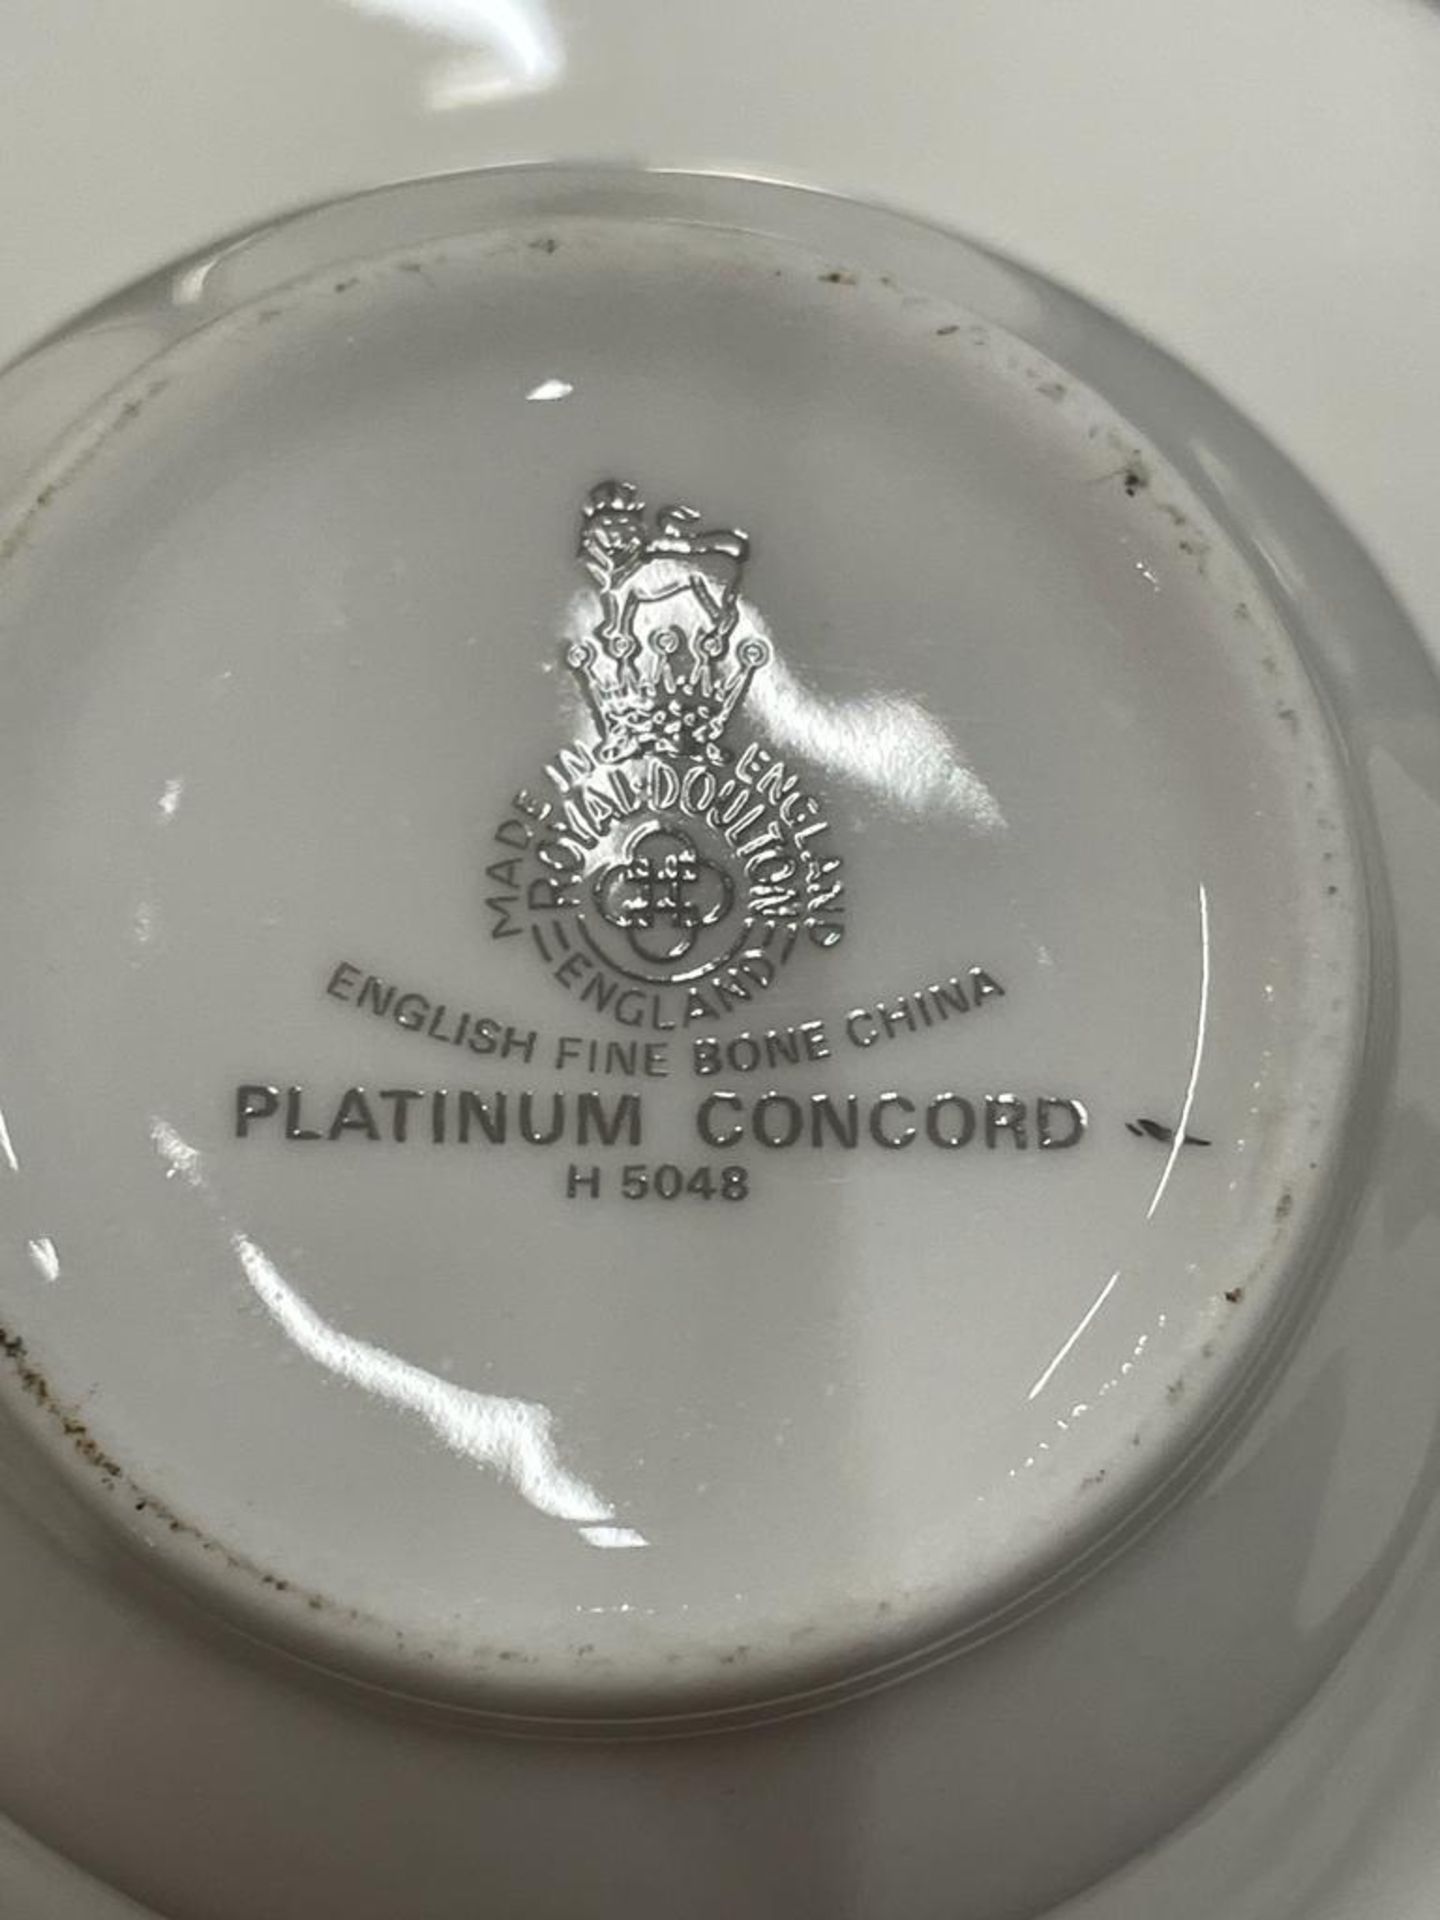 A LARGE ROYAL DOULTON 'PLATINUM CONCORD' PATTERN WHITE BONE CHINA DINNER SERVICE - Image 5 of 5